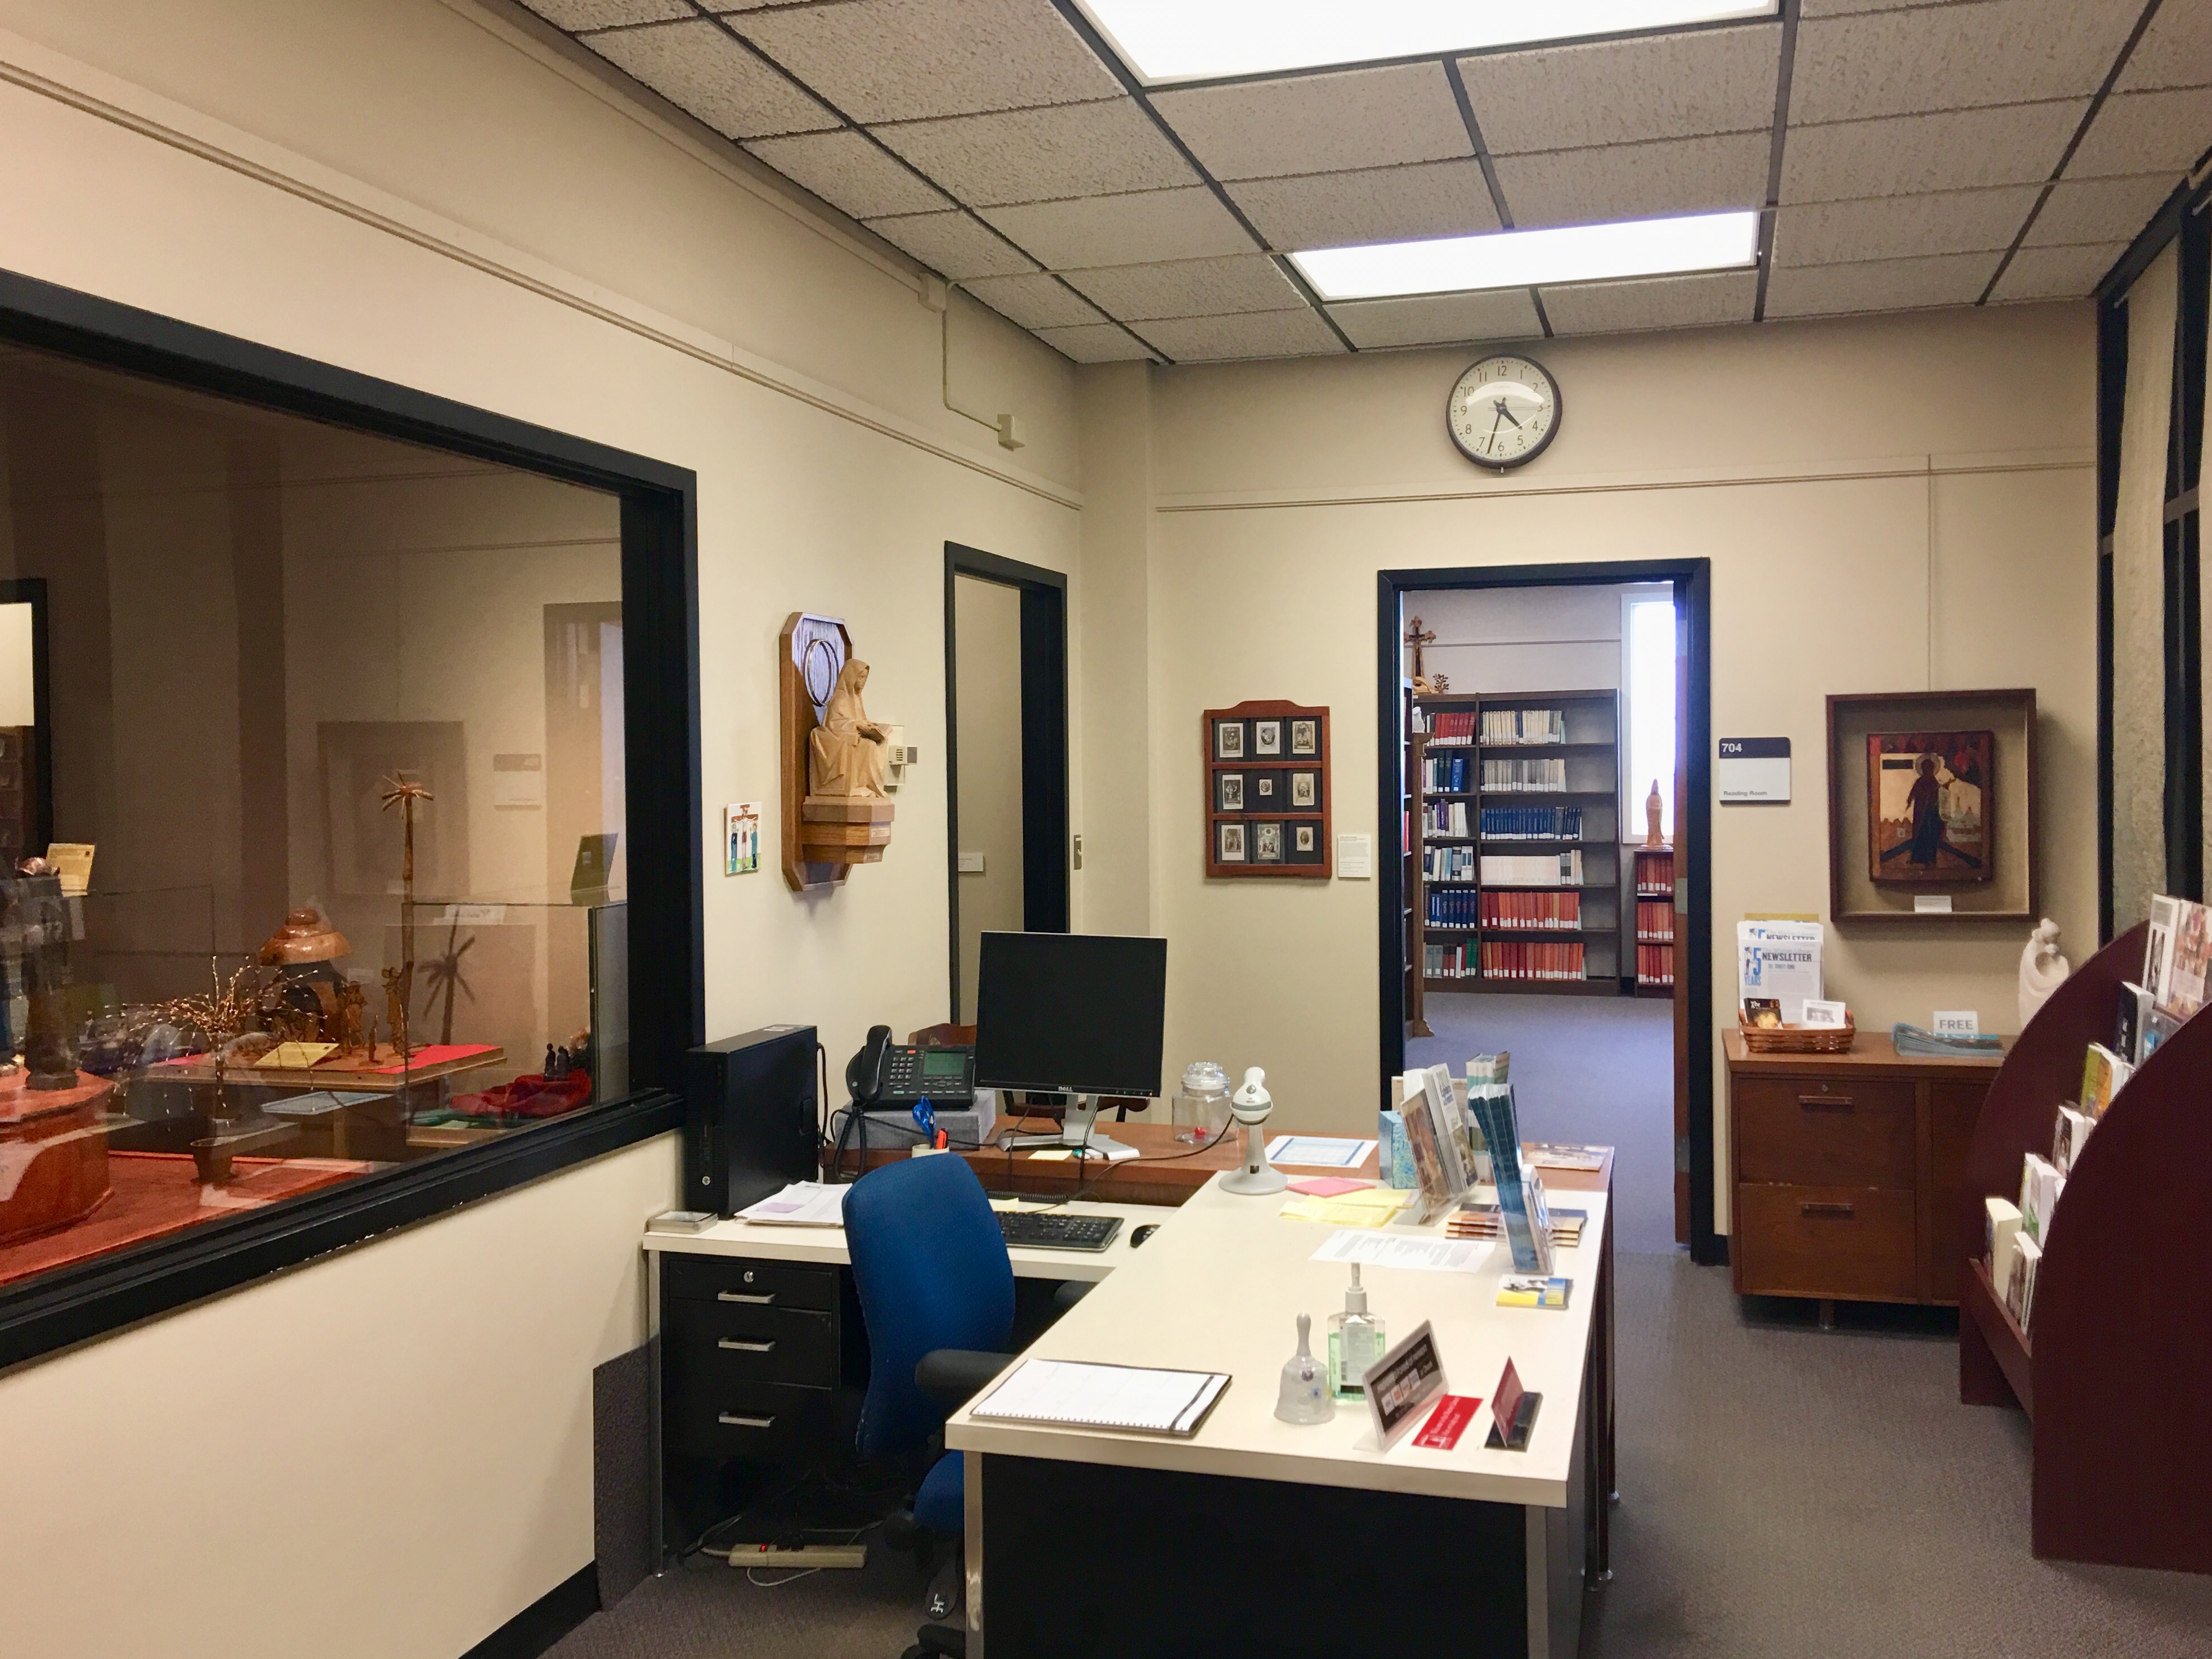 The front desk of the Marian Library, present day.